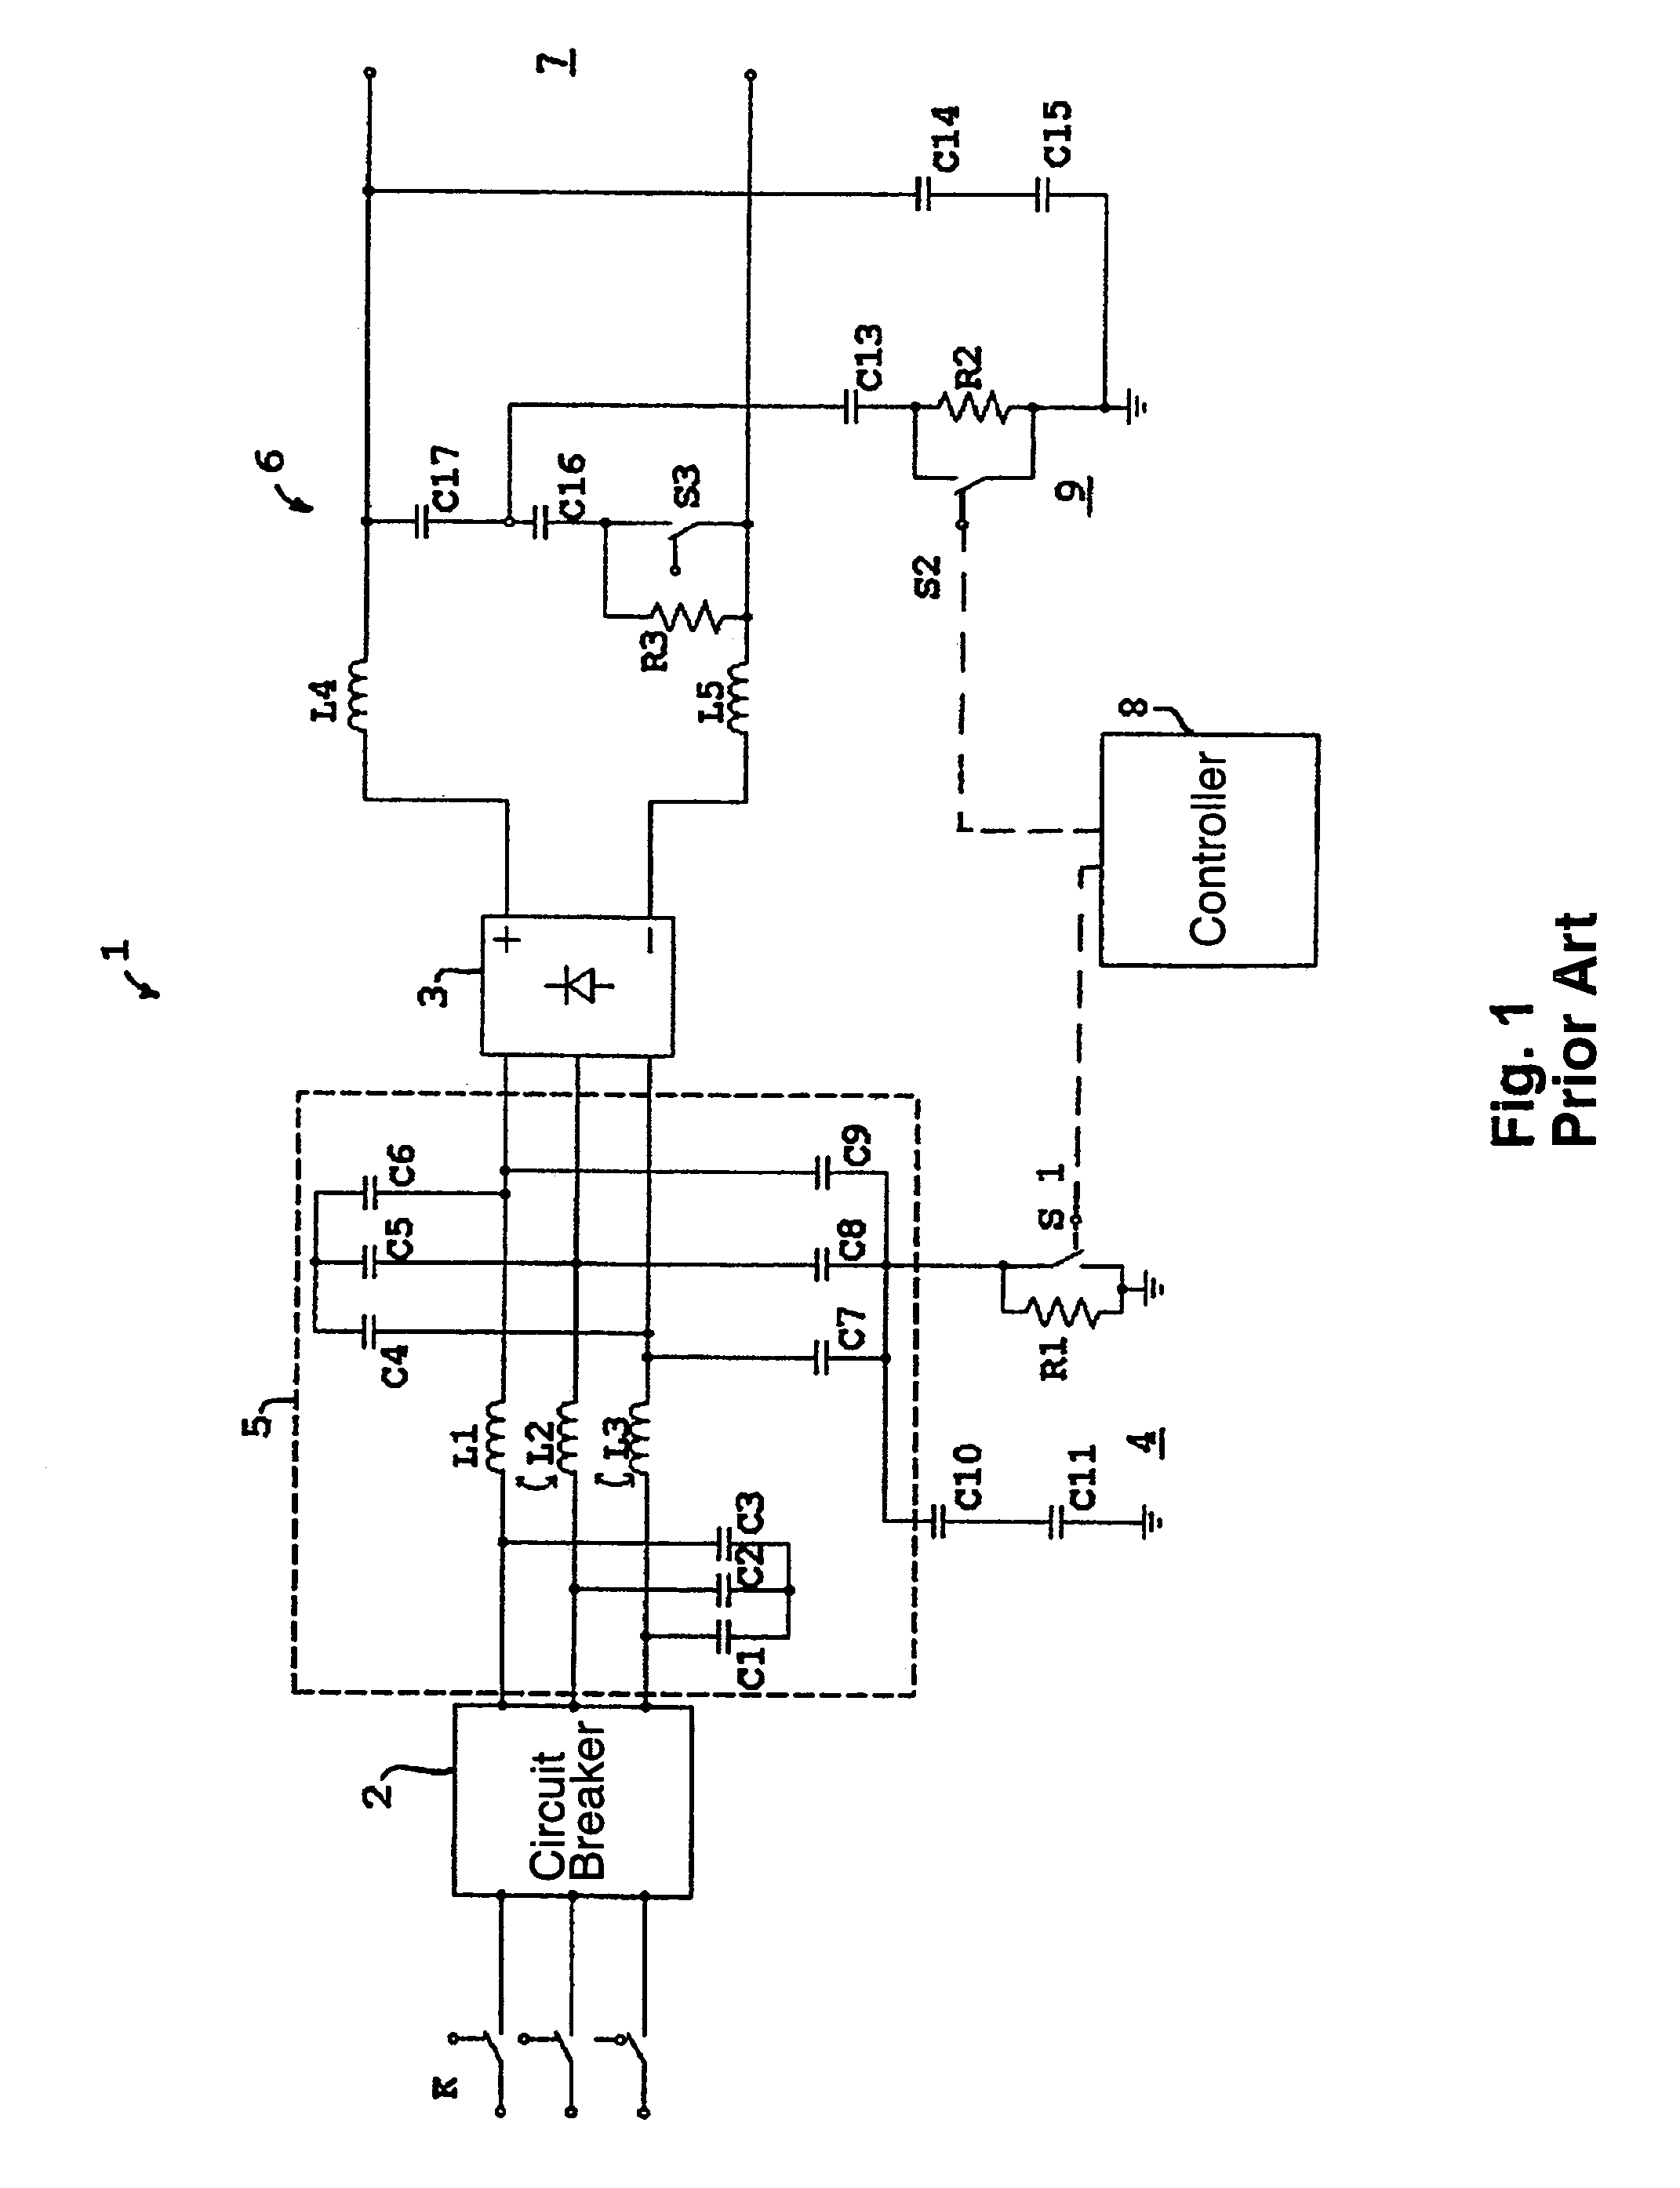 Motor controller incorporating an electronic circuit for protection against inrush currents